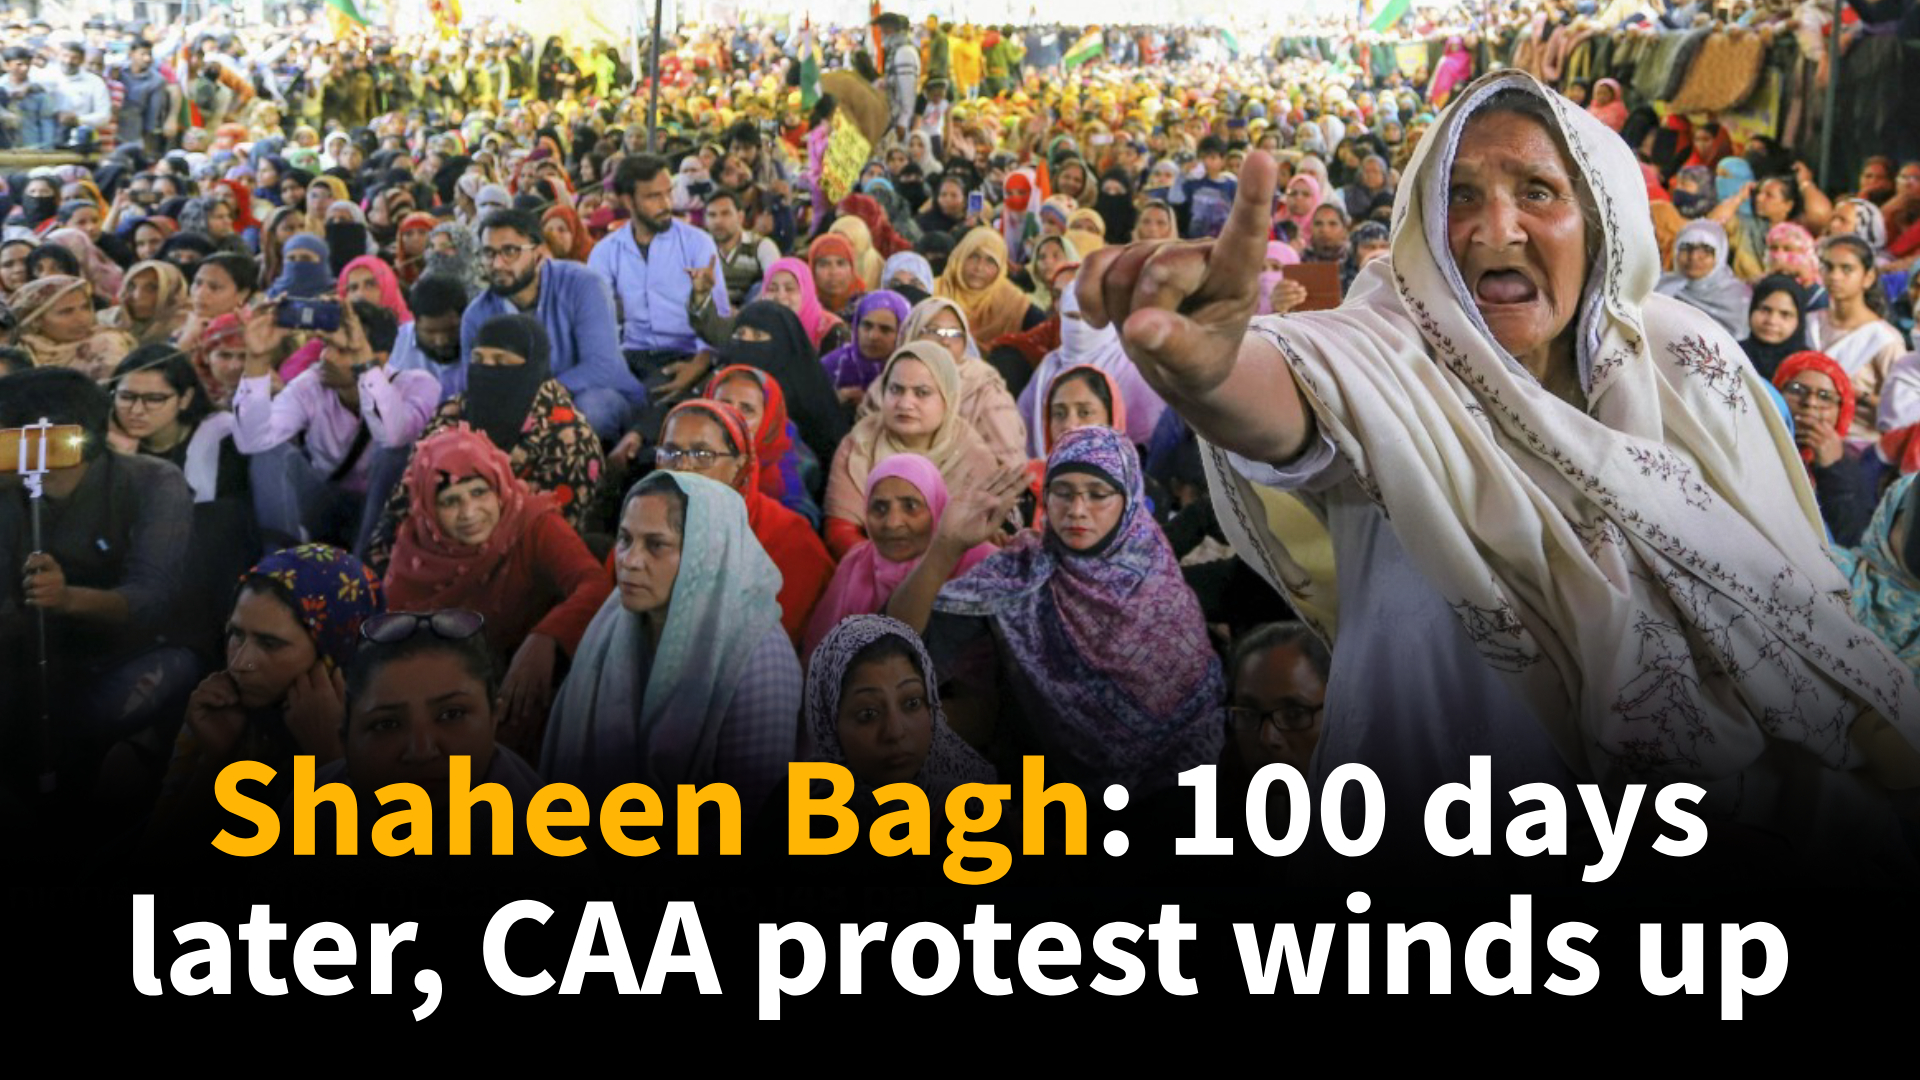 Shaheen Bagh: 100 days later, CAA protest winds up